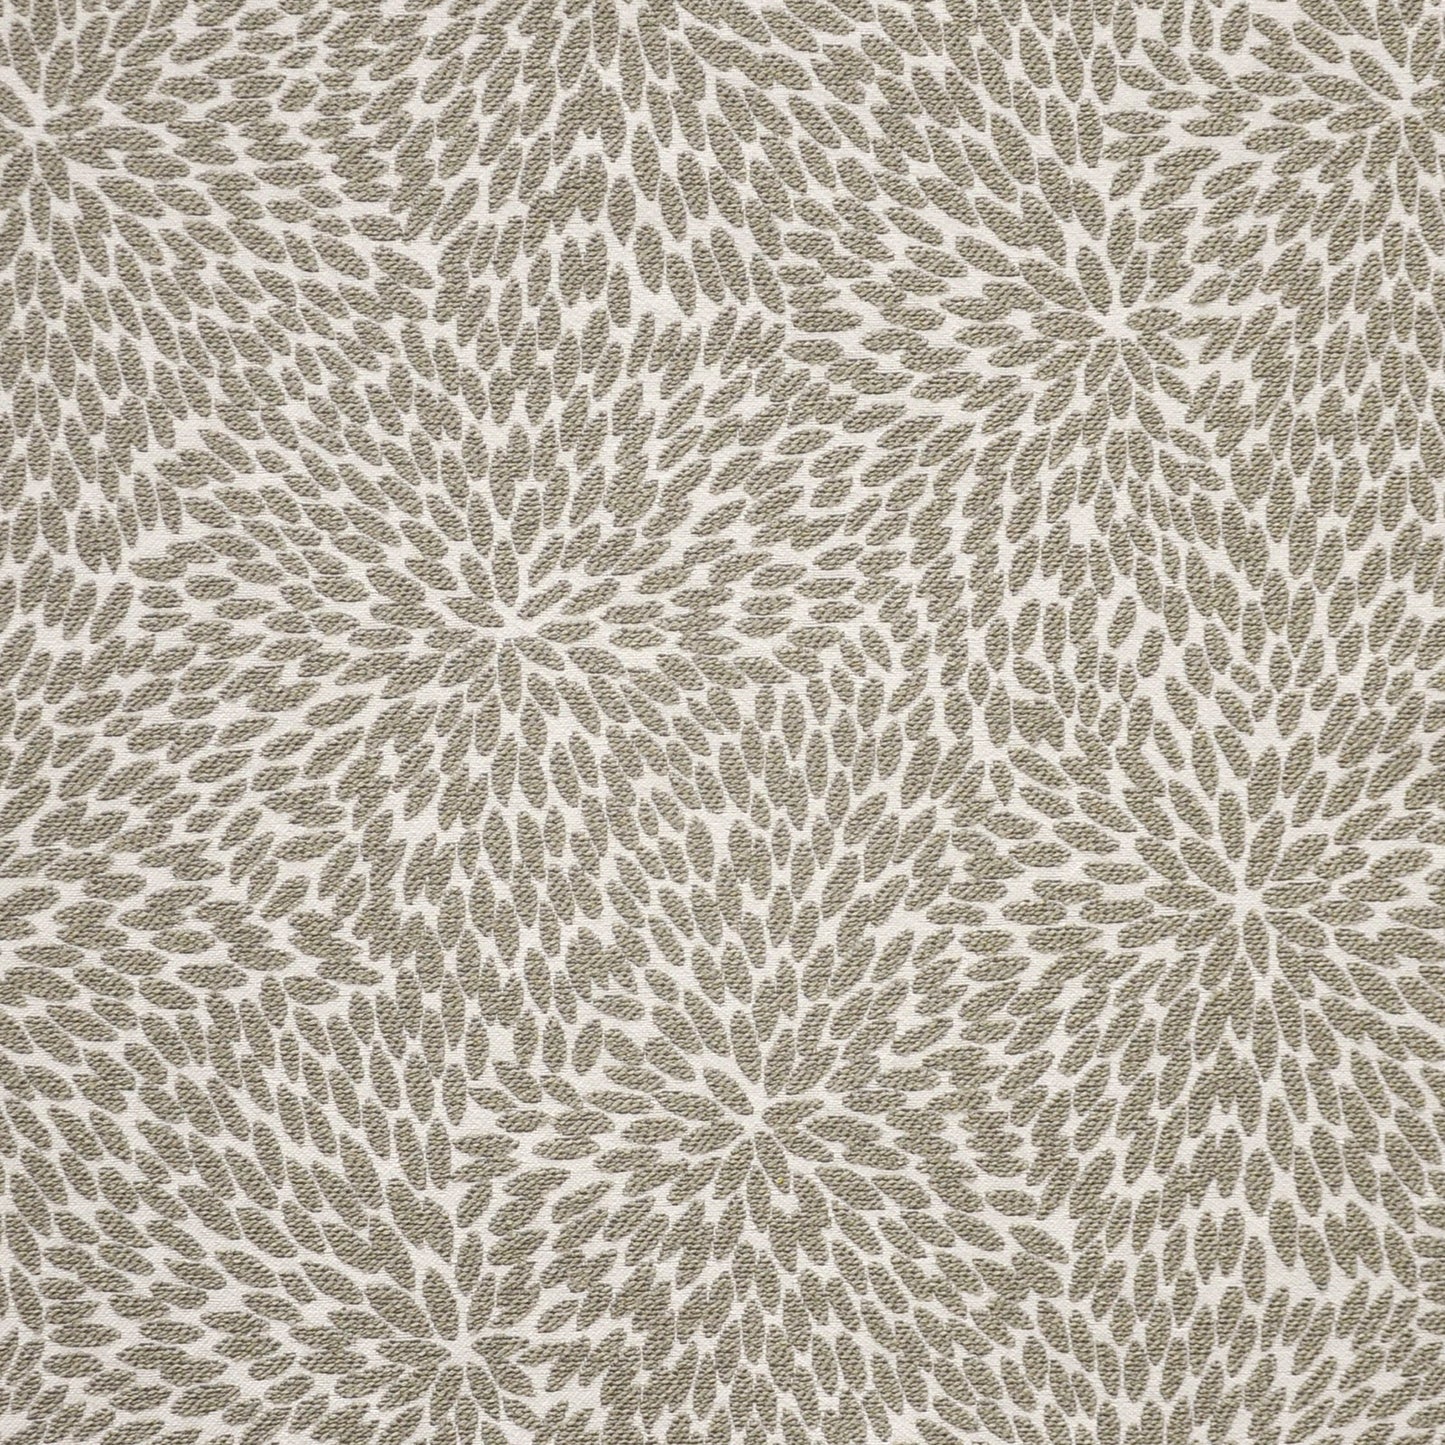 Purchase Maxwell Fabric - Rosaprima, # 912 Dusty Miller